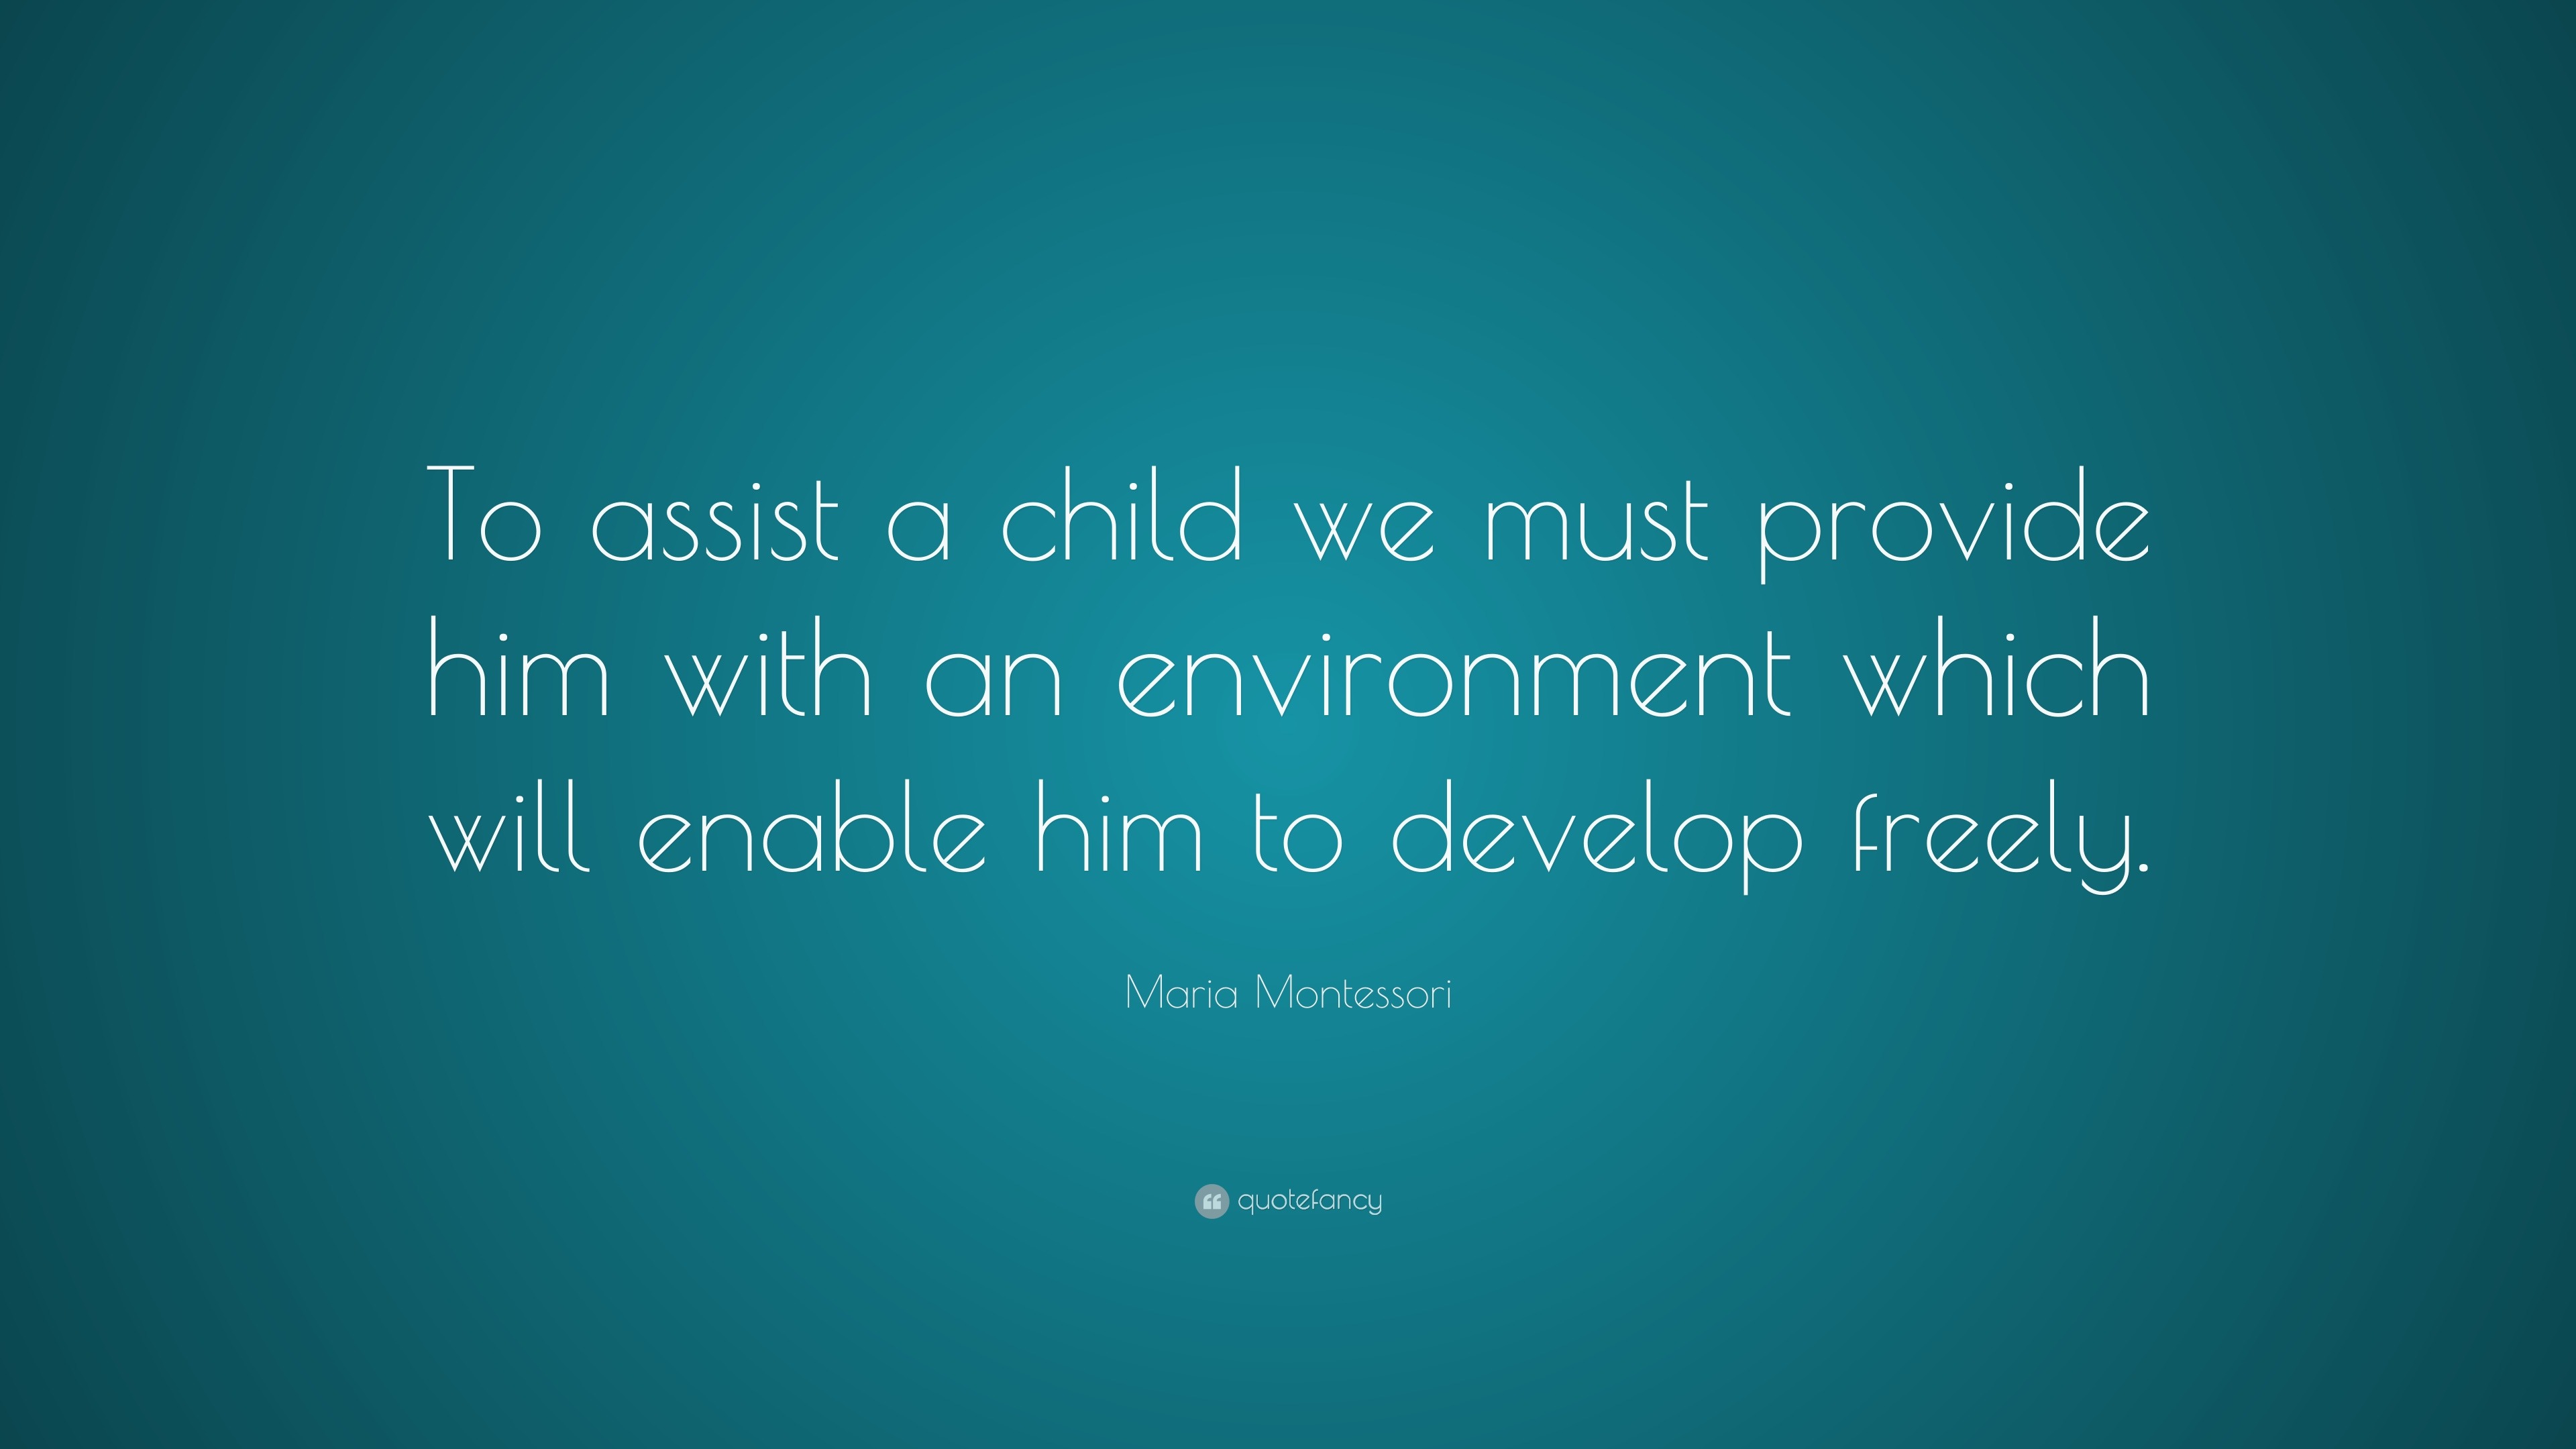 Maria Montessori Quote: “To assist a child we must provide him with an